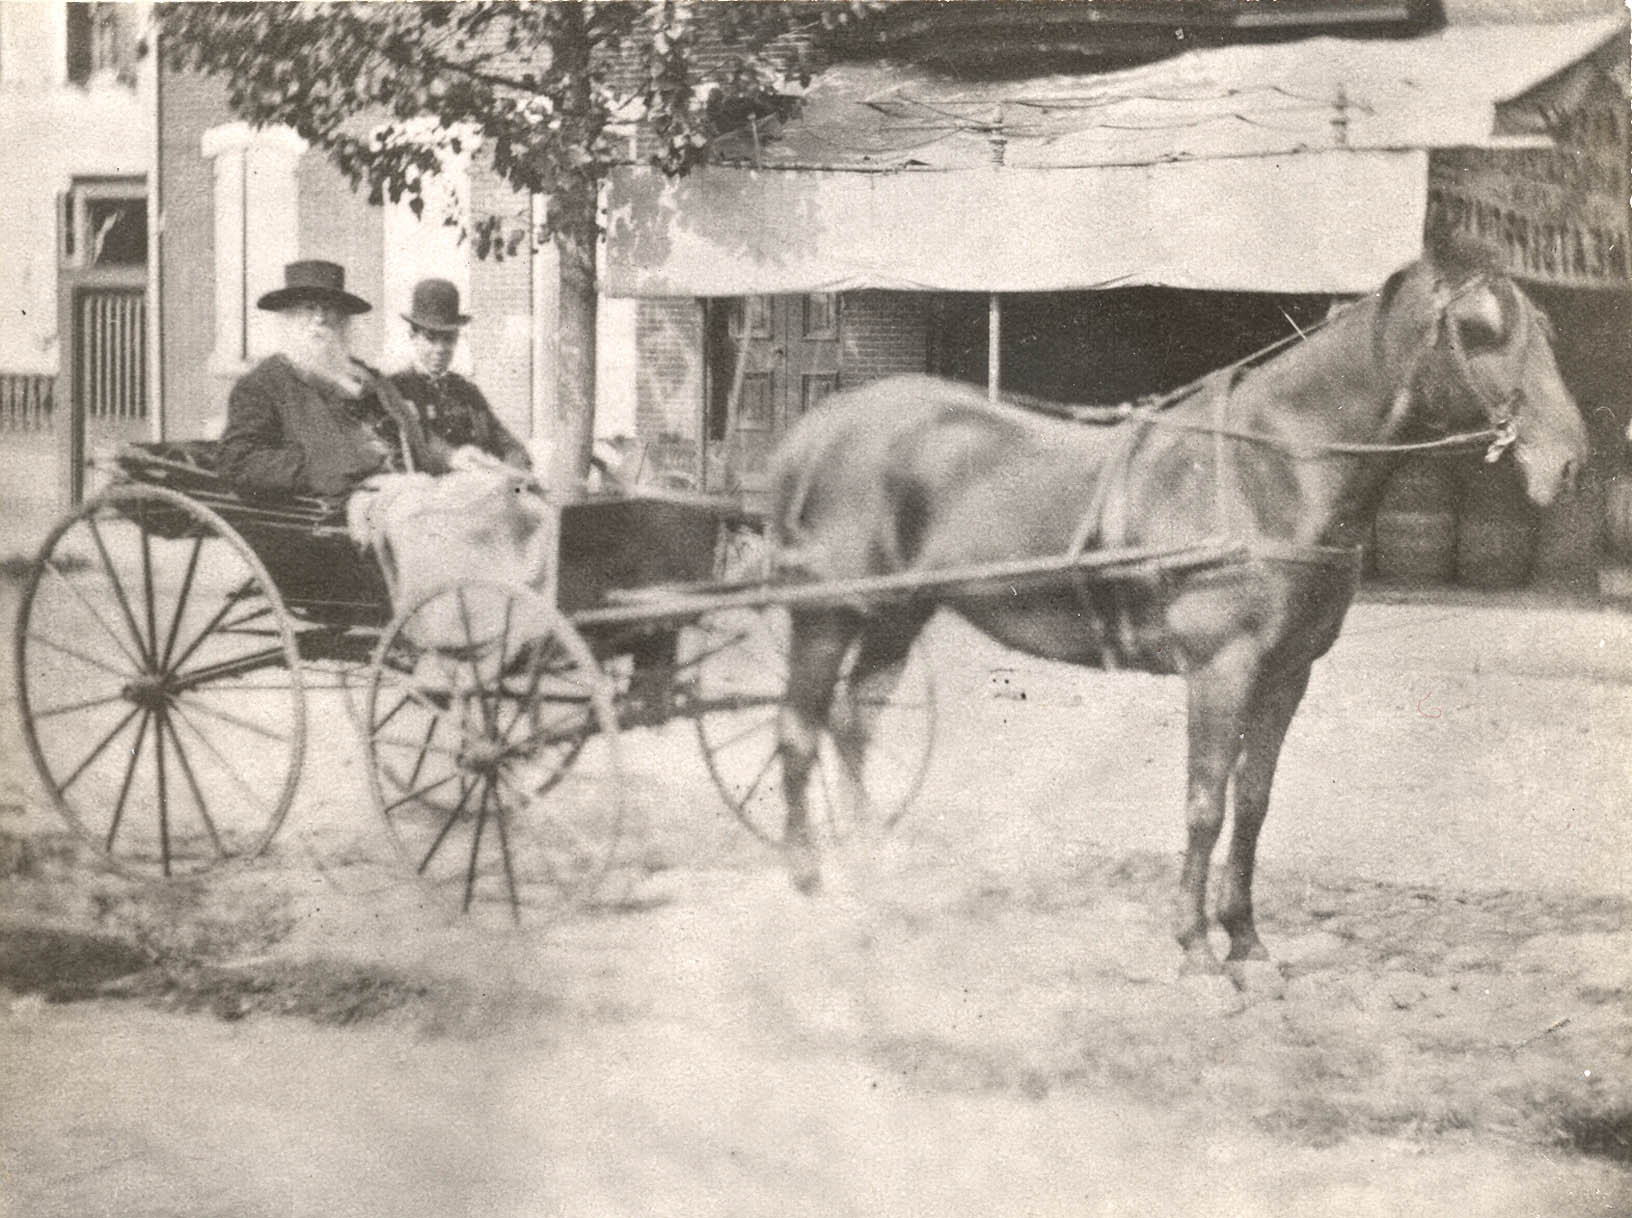 The phaeton and horse Whitman received as a gift from friends in 1885.